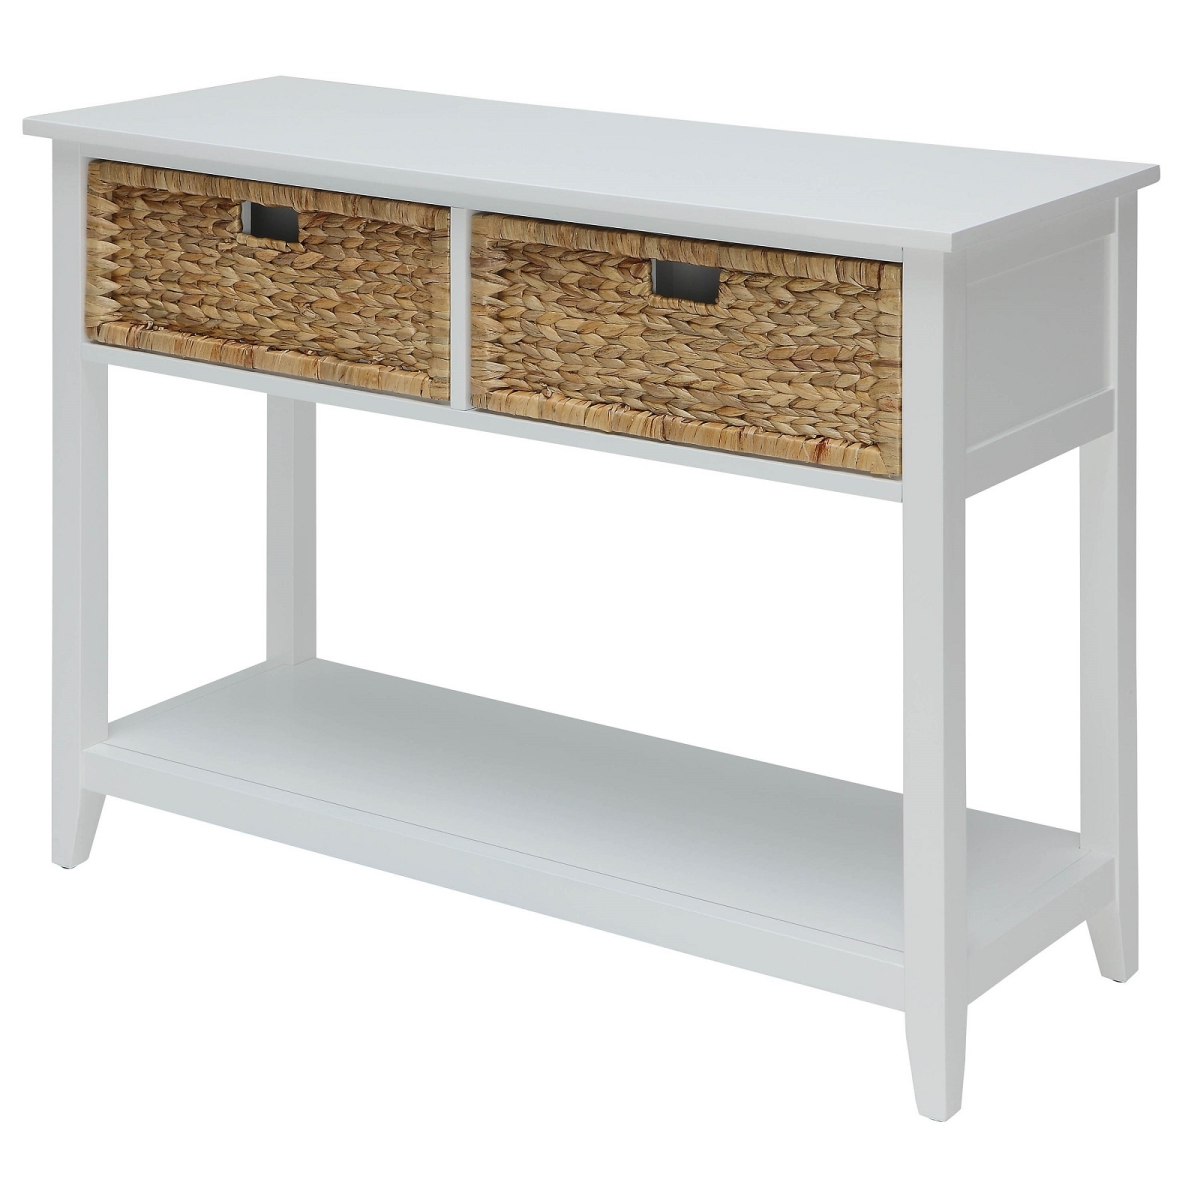 Urban Designs 4726209 Console Table With Two Basket Like Front Drawers, White - 28 X 16 X 44 In.